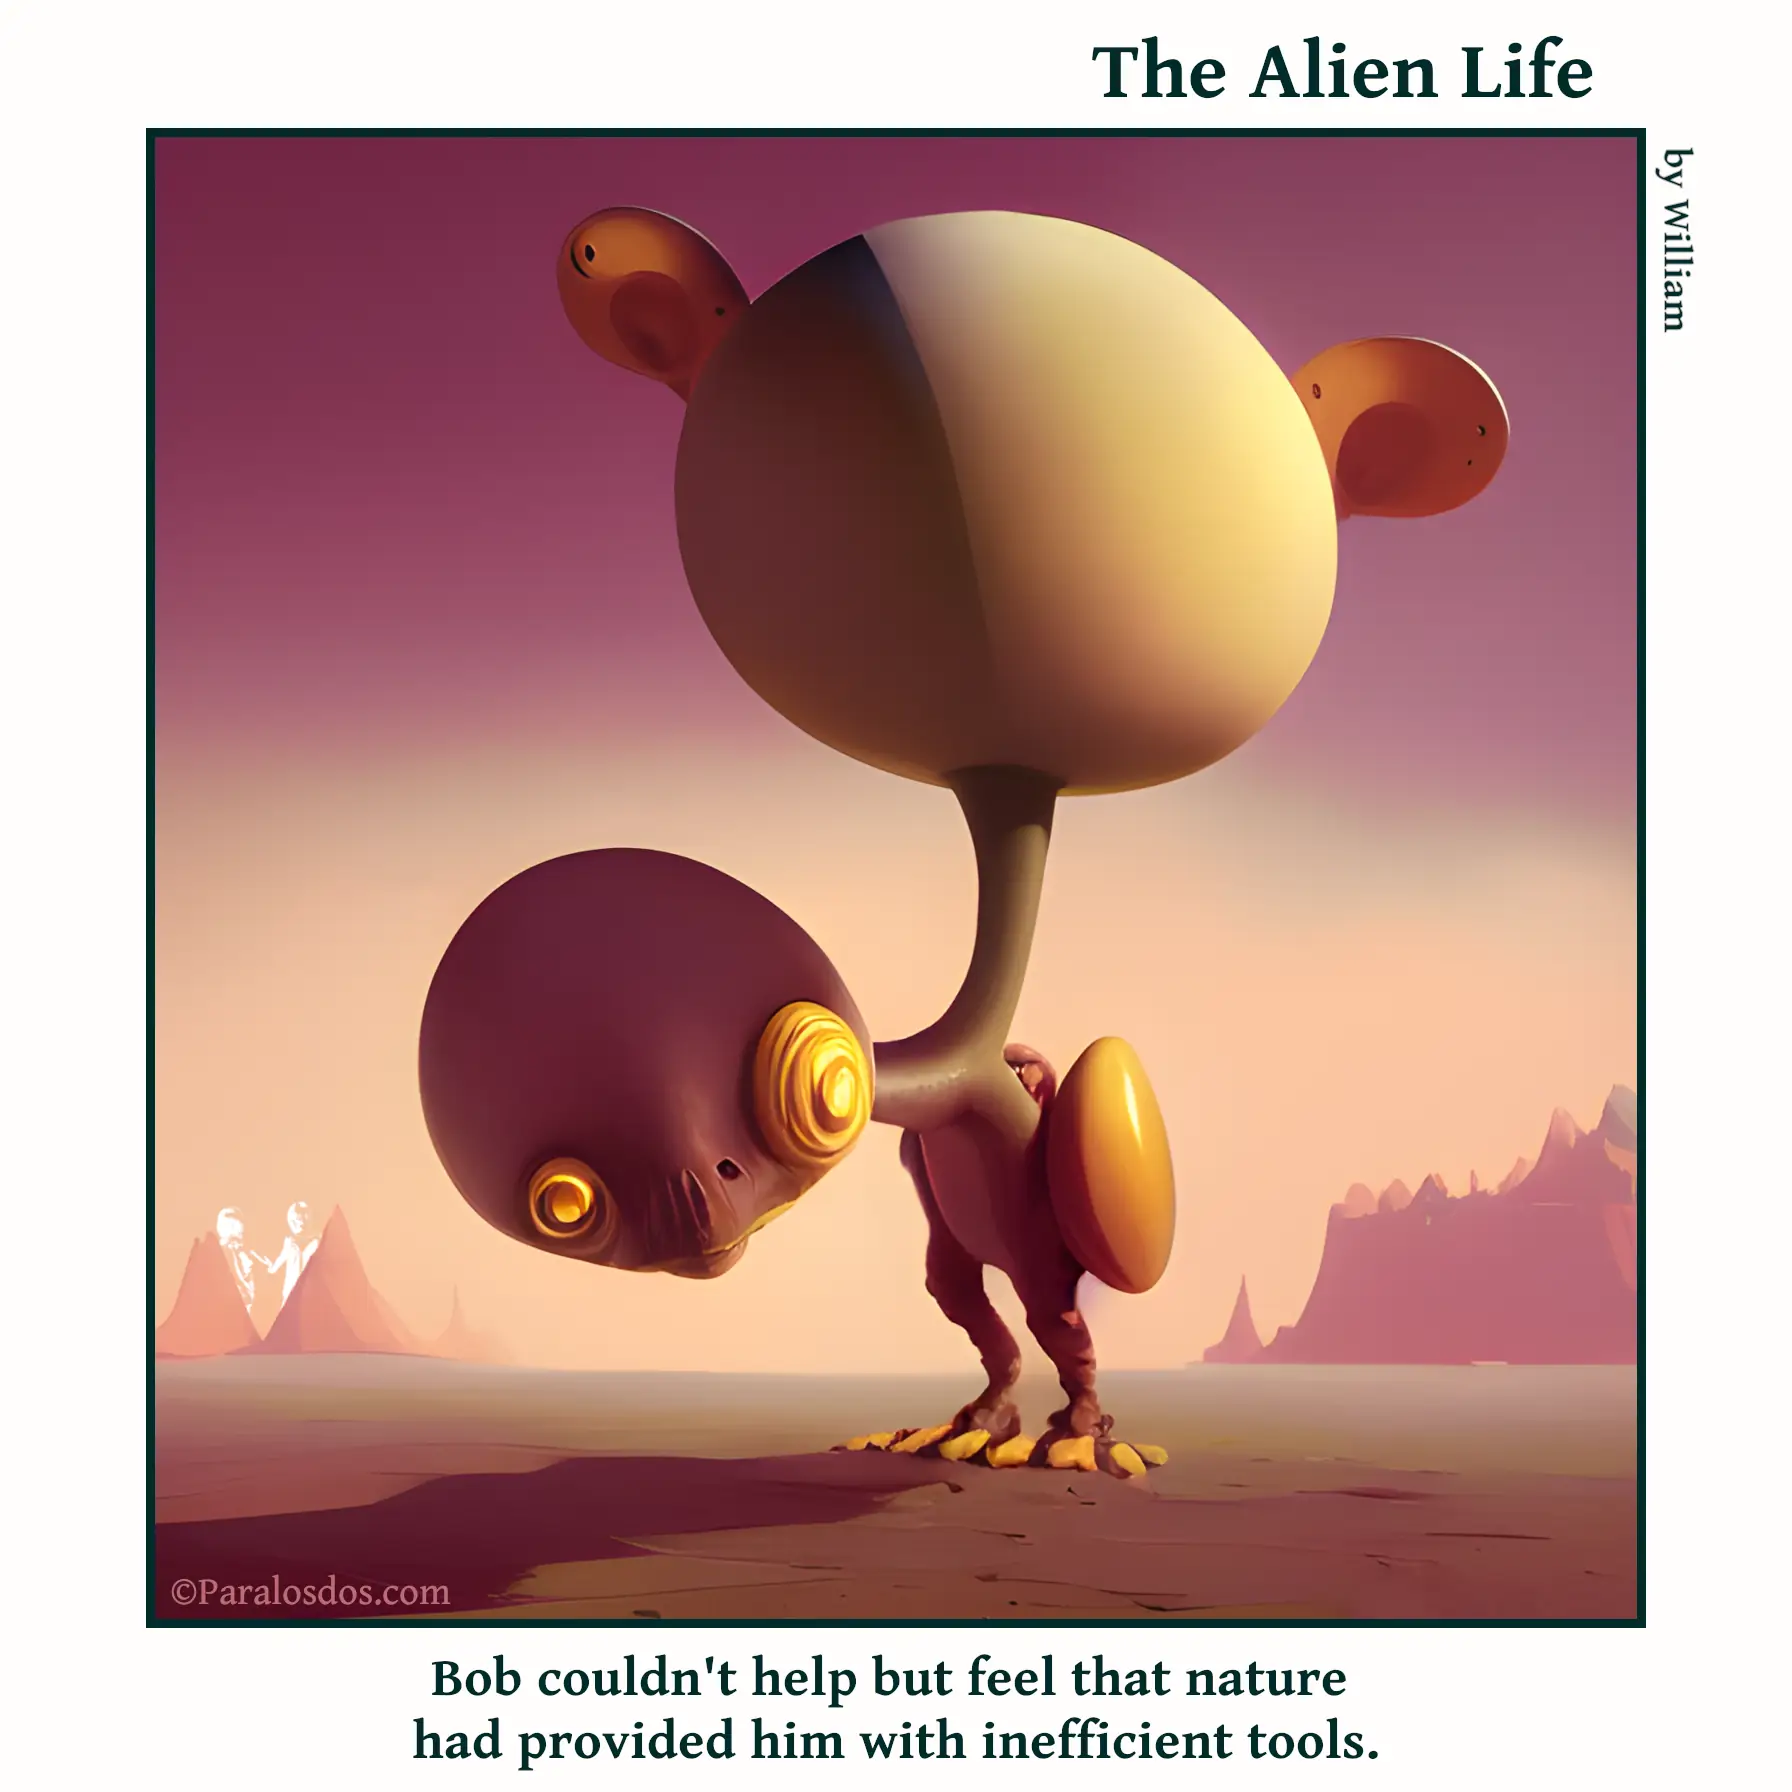 The Alien Life, one panel Comic. An alien with two necks growing from it's shoulders. One head is parallel to the ground and has eyes. The other head has only ears and is up high. It also has oblong wings. The caption reads: Bob couldn't help but feel that nature had provided him with inefficient tools.